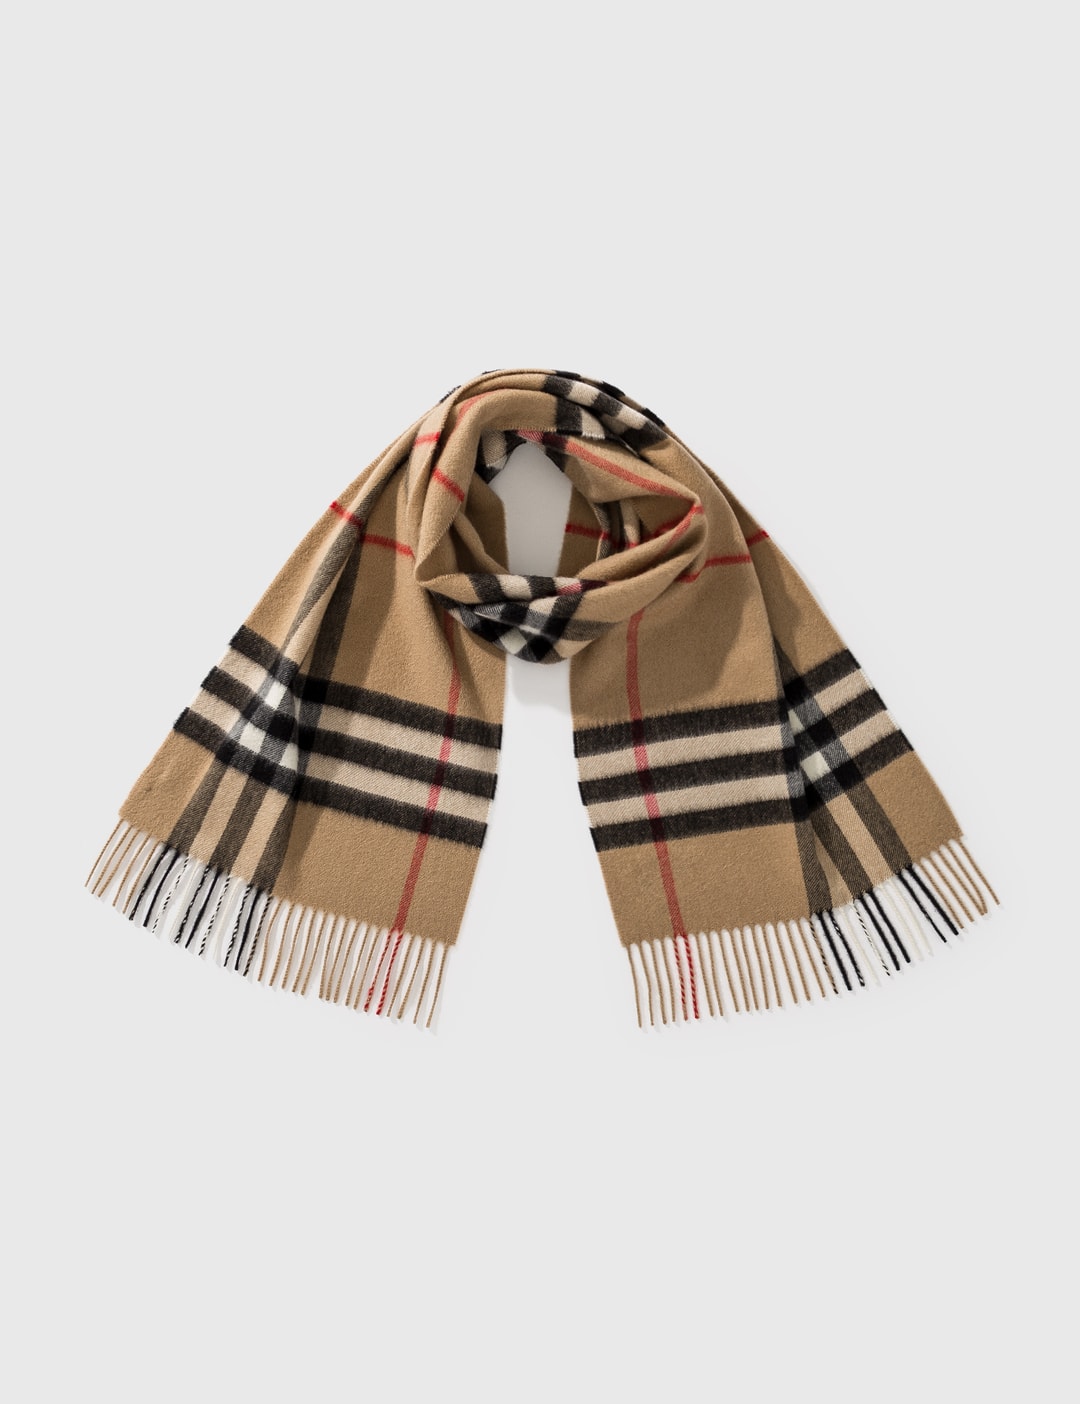 Burberry - The Classic Check Cashmere Scarf | HBX - Globally Curated  Fashion and Lifestyle by Hypebeast